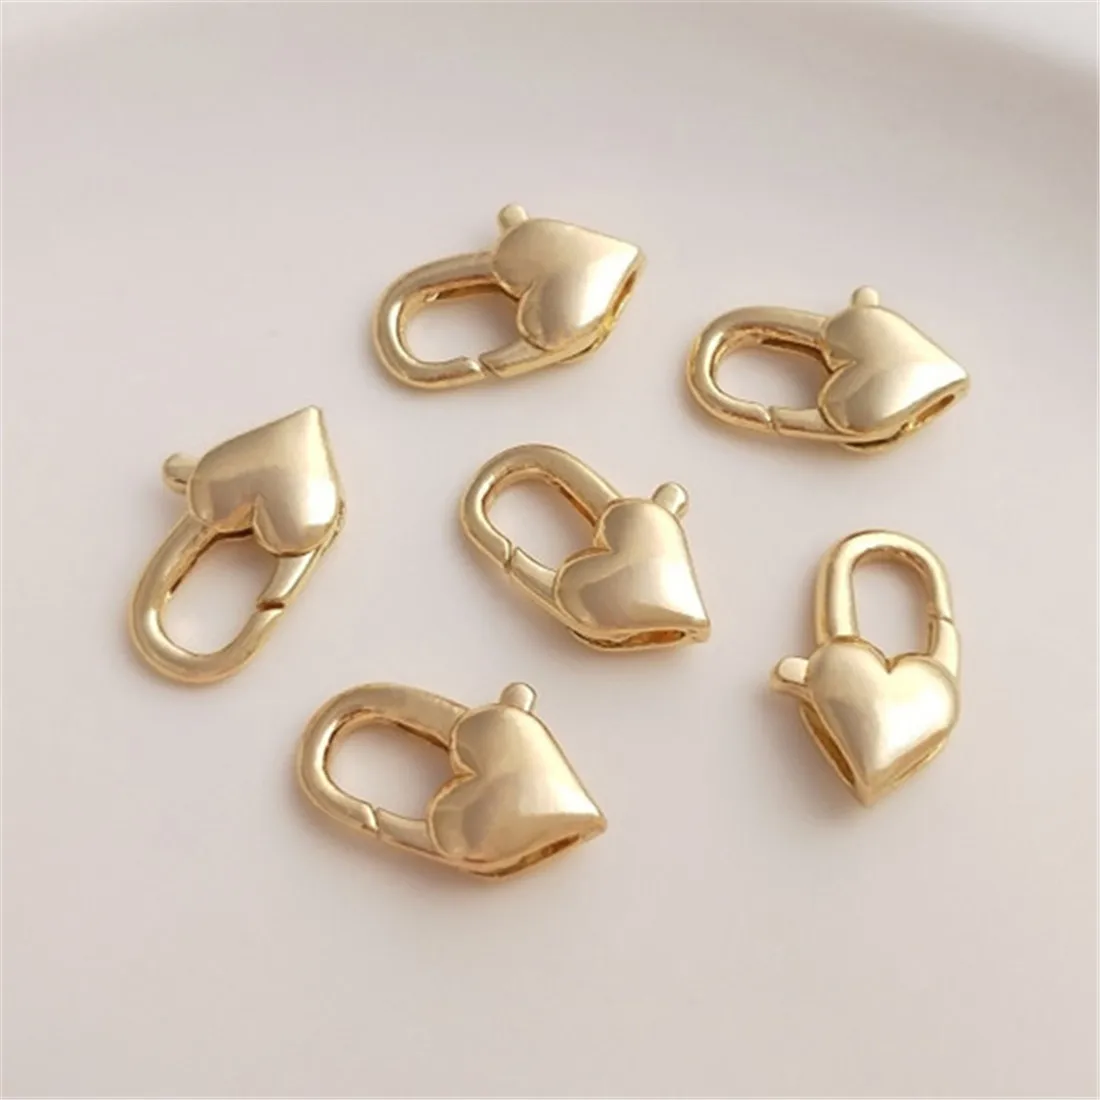 14K Gold Heart-shaped Chain Necklace Clasp Love Lobster Clasp Spring Clasp Diy Handmade Jewelry Accessories B913 30pcs 15mm bag metal hanging buckles dog collar webbing hanger lobster clasp swivel trigger clips snap hook diy accessories